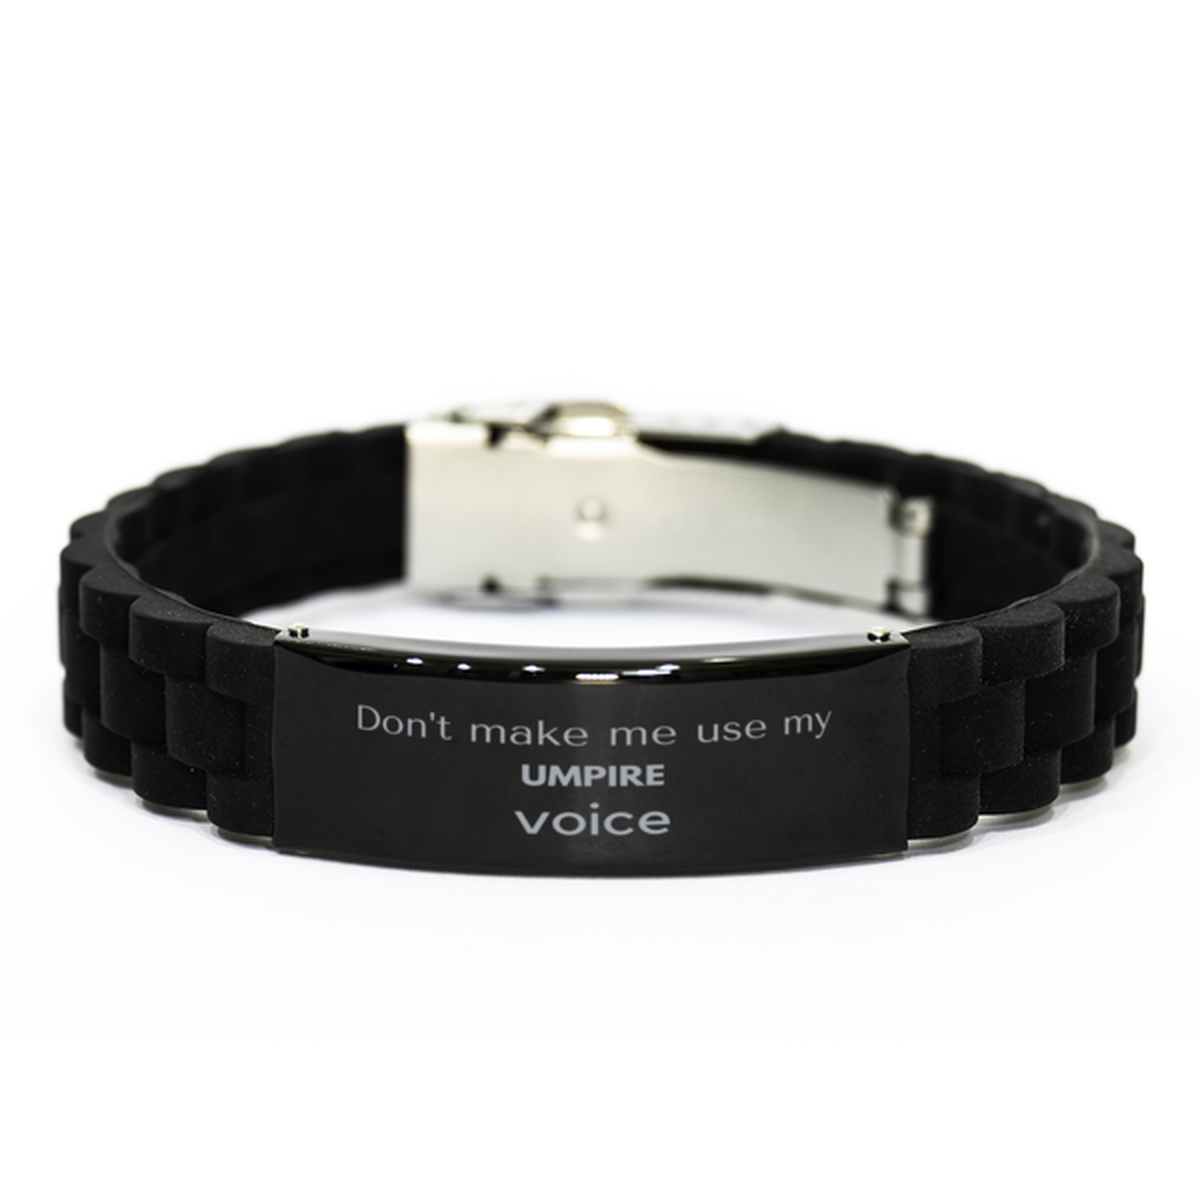 Don't make me use my Umpire voice, Sarcasm Umpire Gifts, Christmas Umpire Black Glidelock Clasp Bracelet Birthday Unique Gifts For Umpire Coworkers, Men, Women, Colleague, Friends